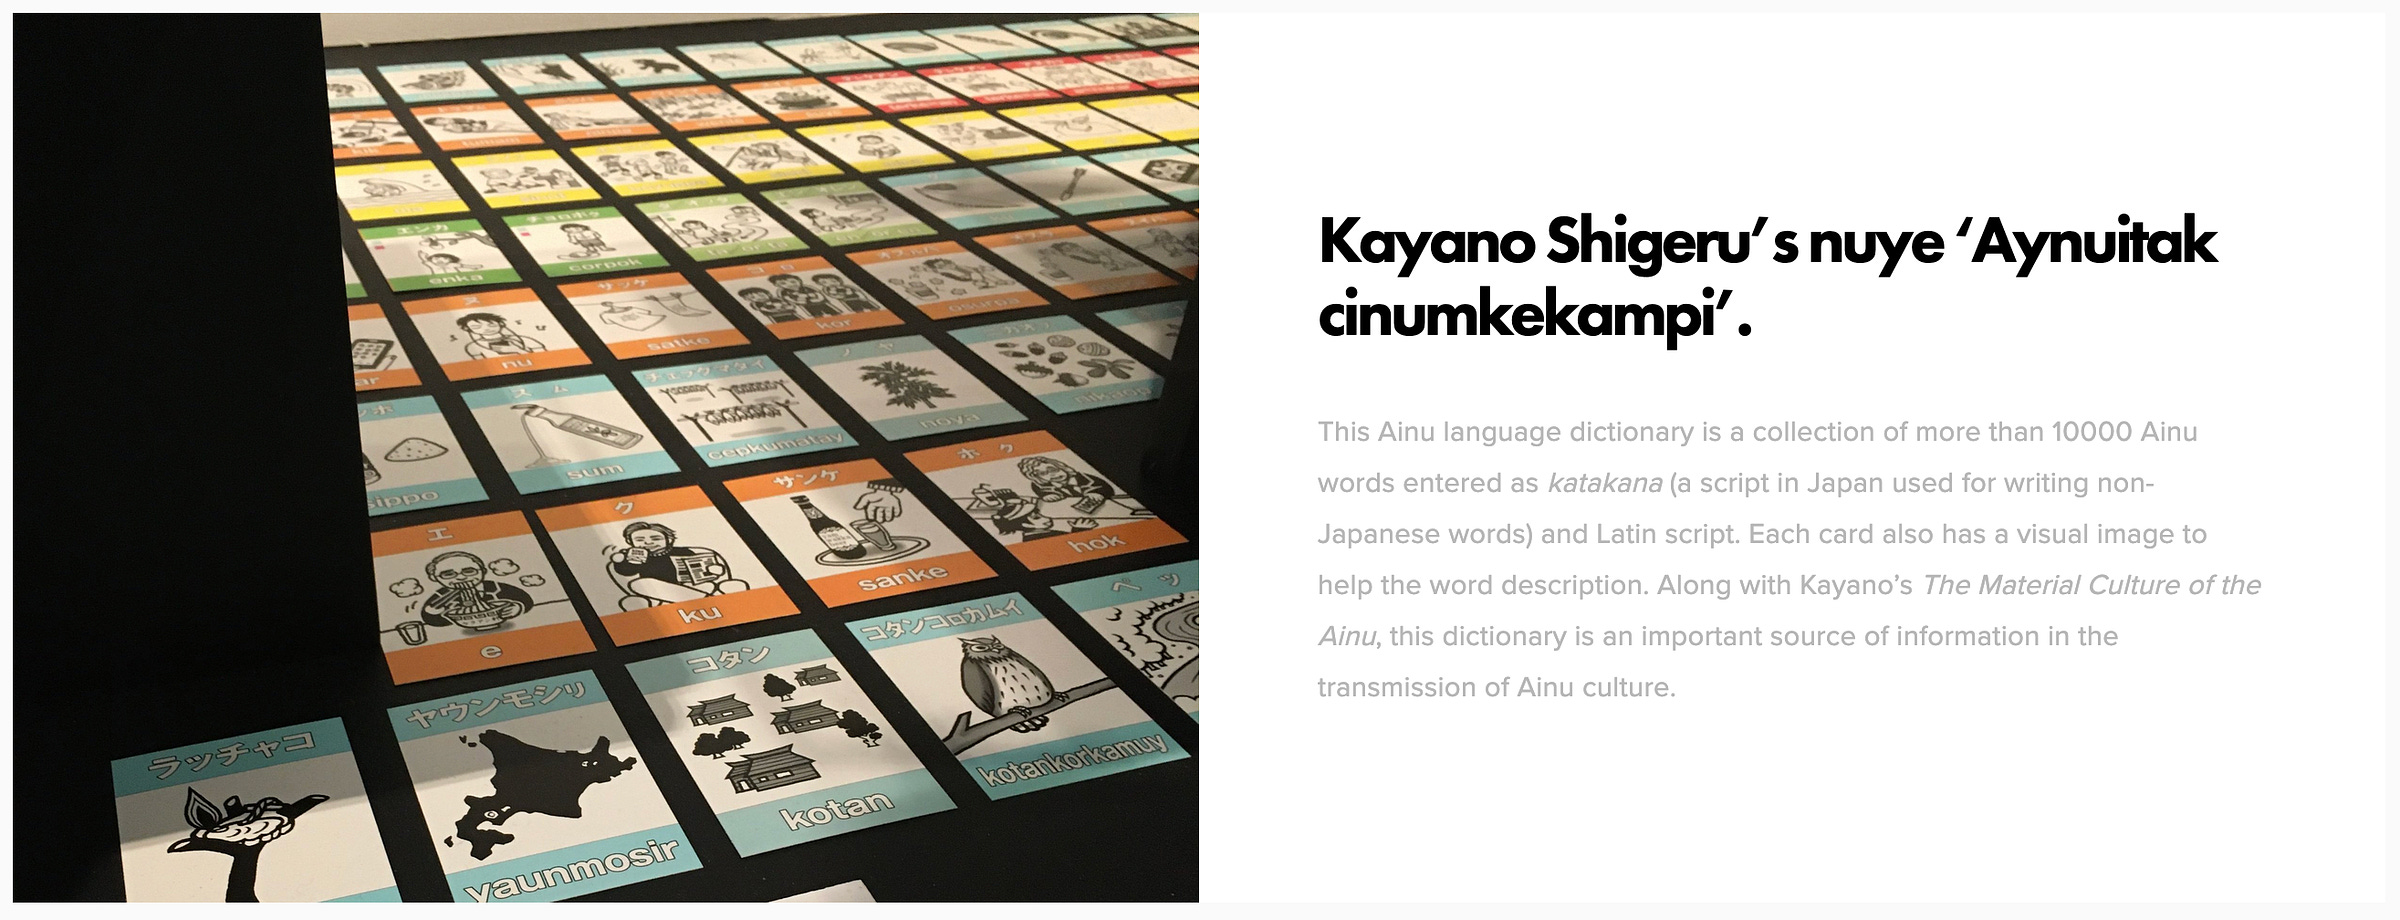 Kayano Shigeru’s nuye ‘Aynuitak cinumkekampi’. This Ainu language dictionary is a collection of more than 10000 Ainu words entered as katakana (a script in Japan used for writing non-Japanese words) and Latin script. Each card also has a visual image to help the word description. Along with Kayano’s The Material Culture of the Ainu, this dictionary is an important source of information in the transmission of Ainu culture.